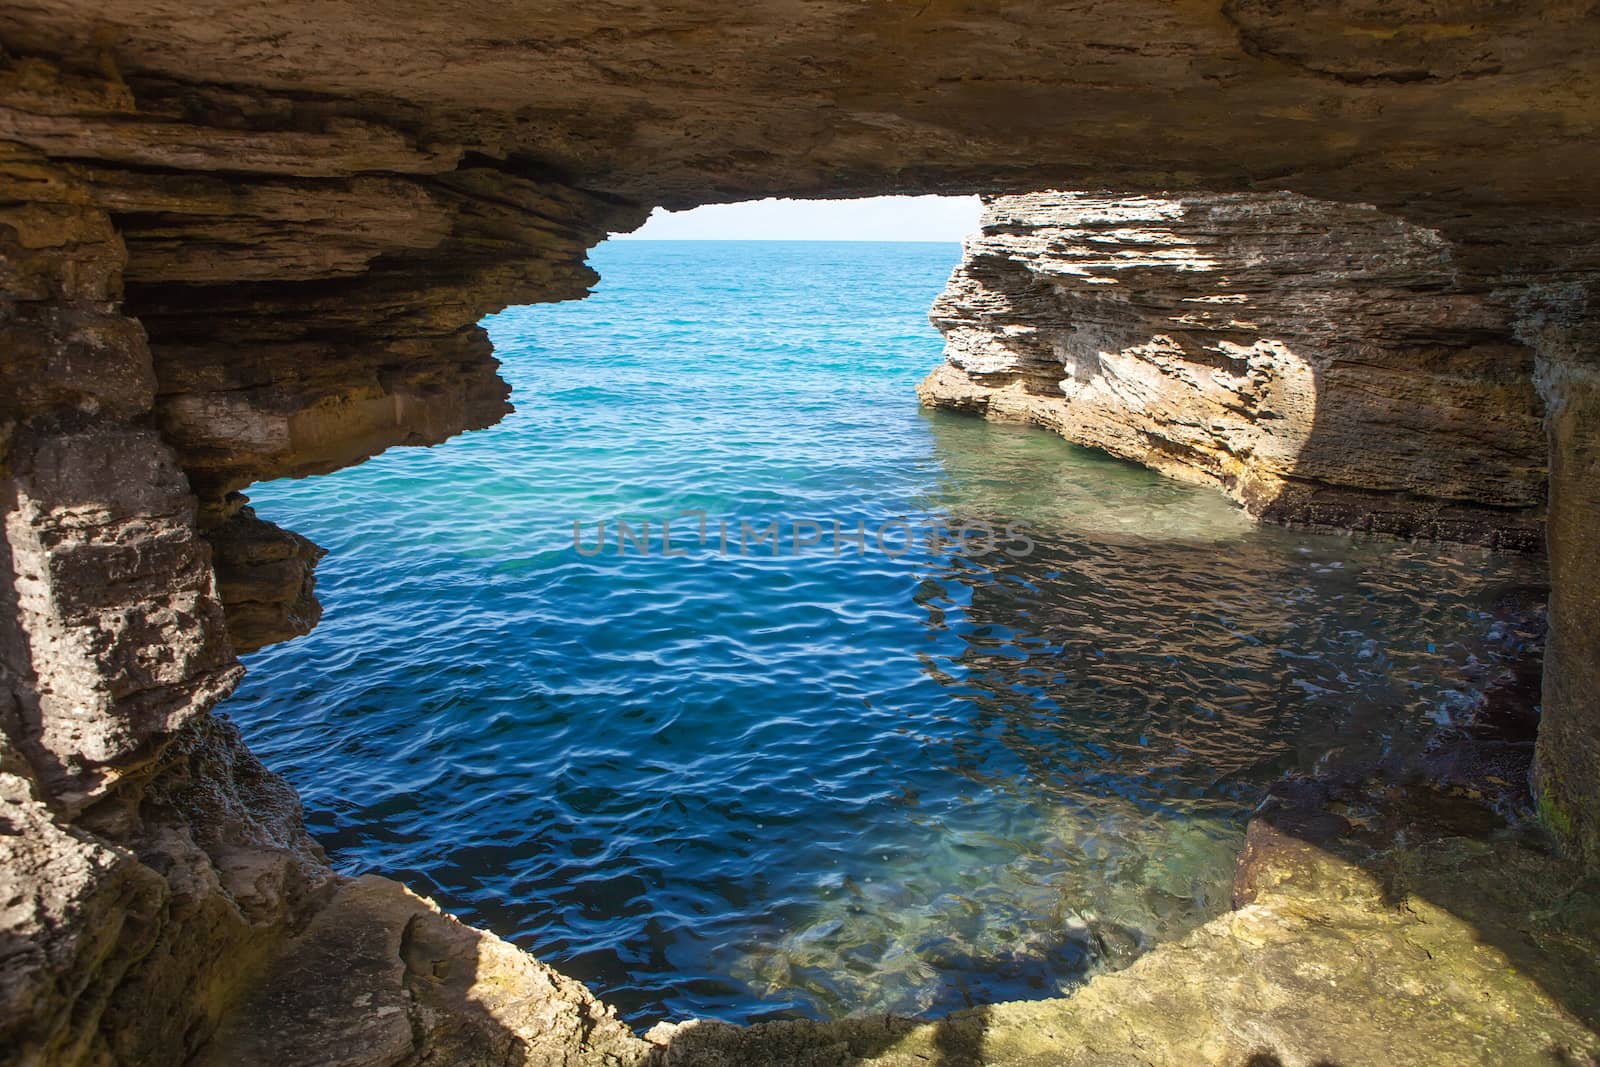 View of an ocean cave rock formation located on the island of Bermuda.  